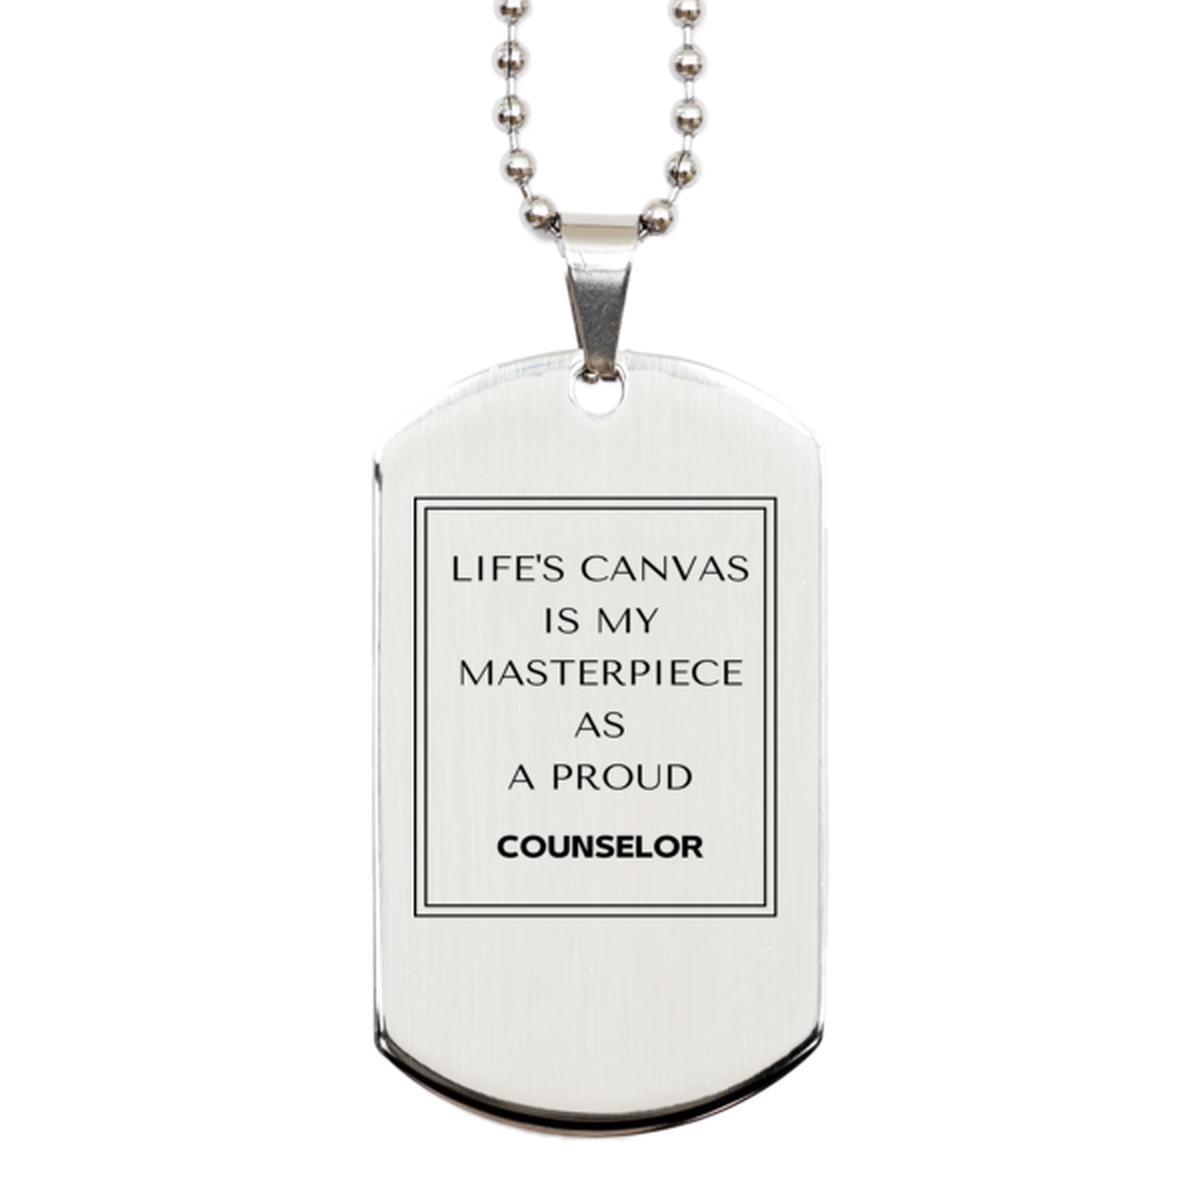 Proud Counselor Gifts, Life's canvas is my masterpiece, Epic Birthday Christmas Unique Silver Dog Tag For Counselor, Coworkers, Men, Women, Friends